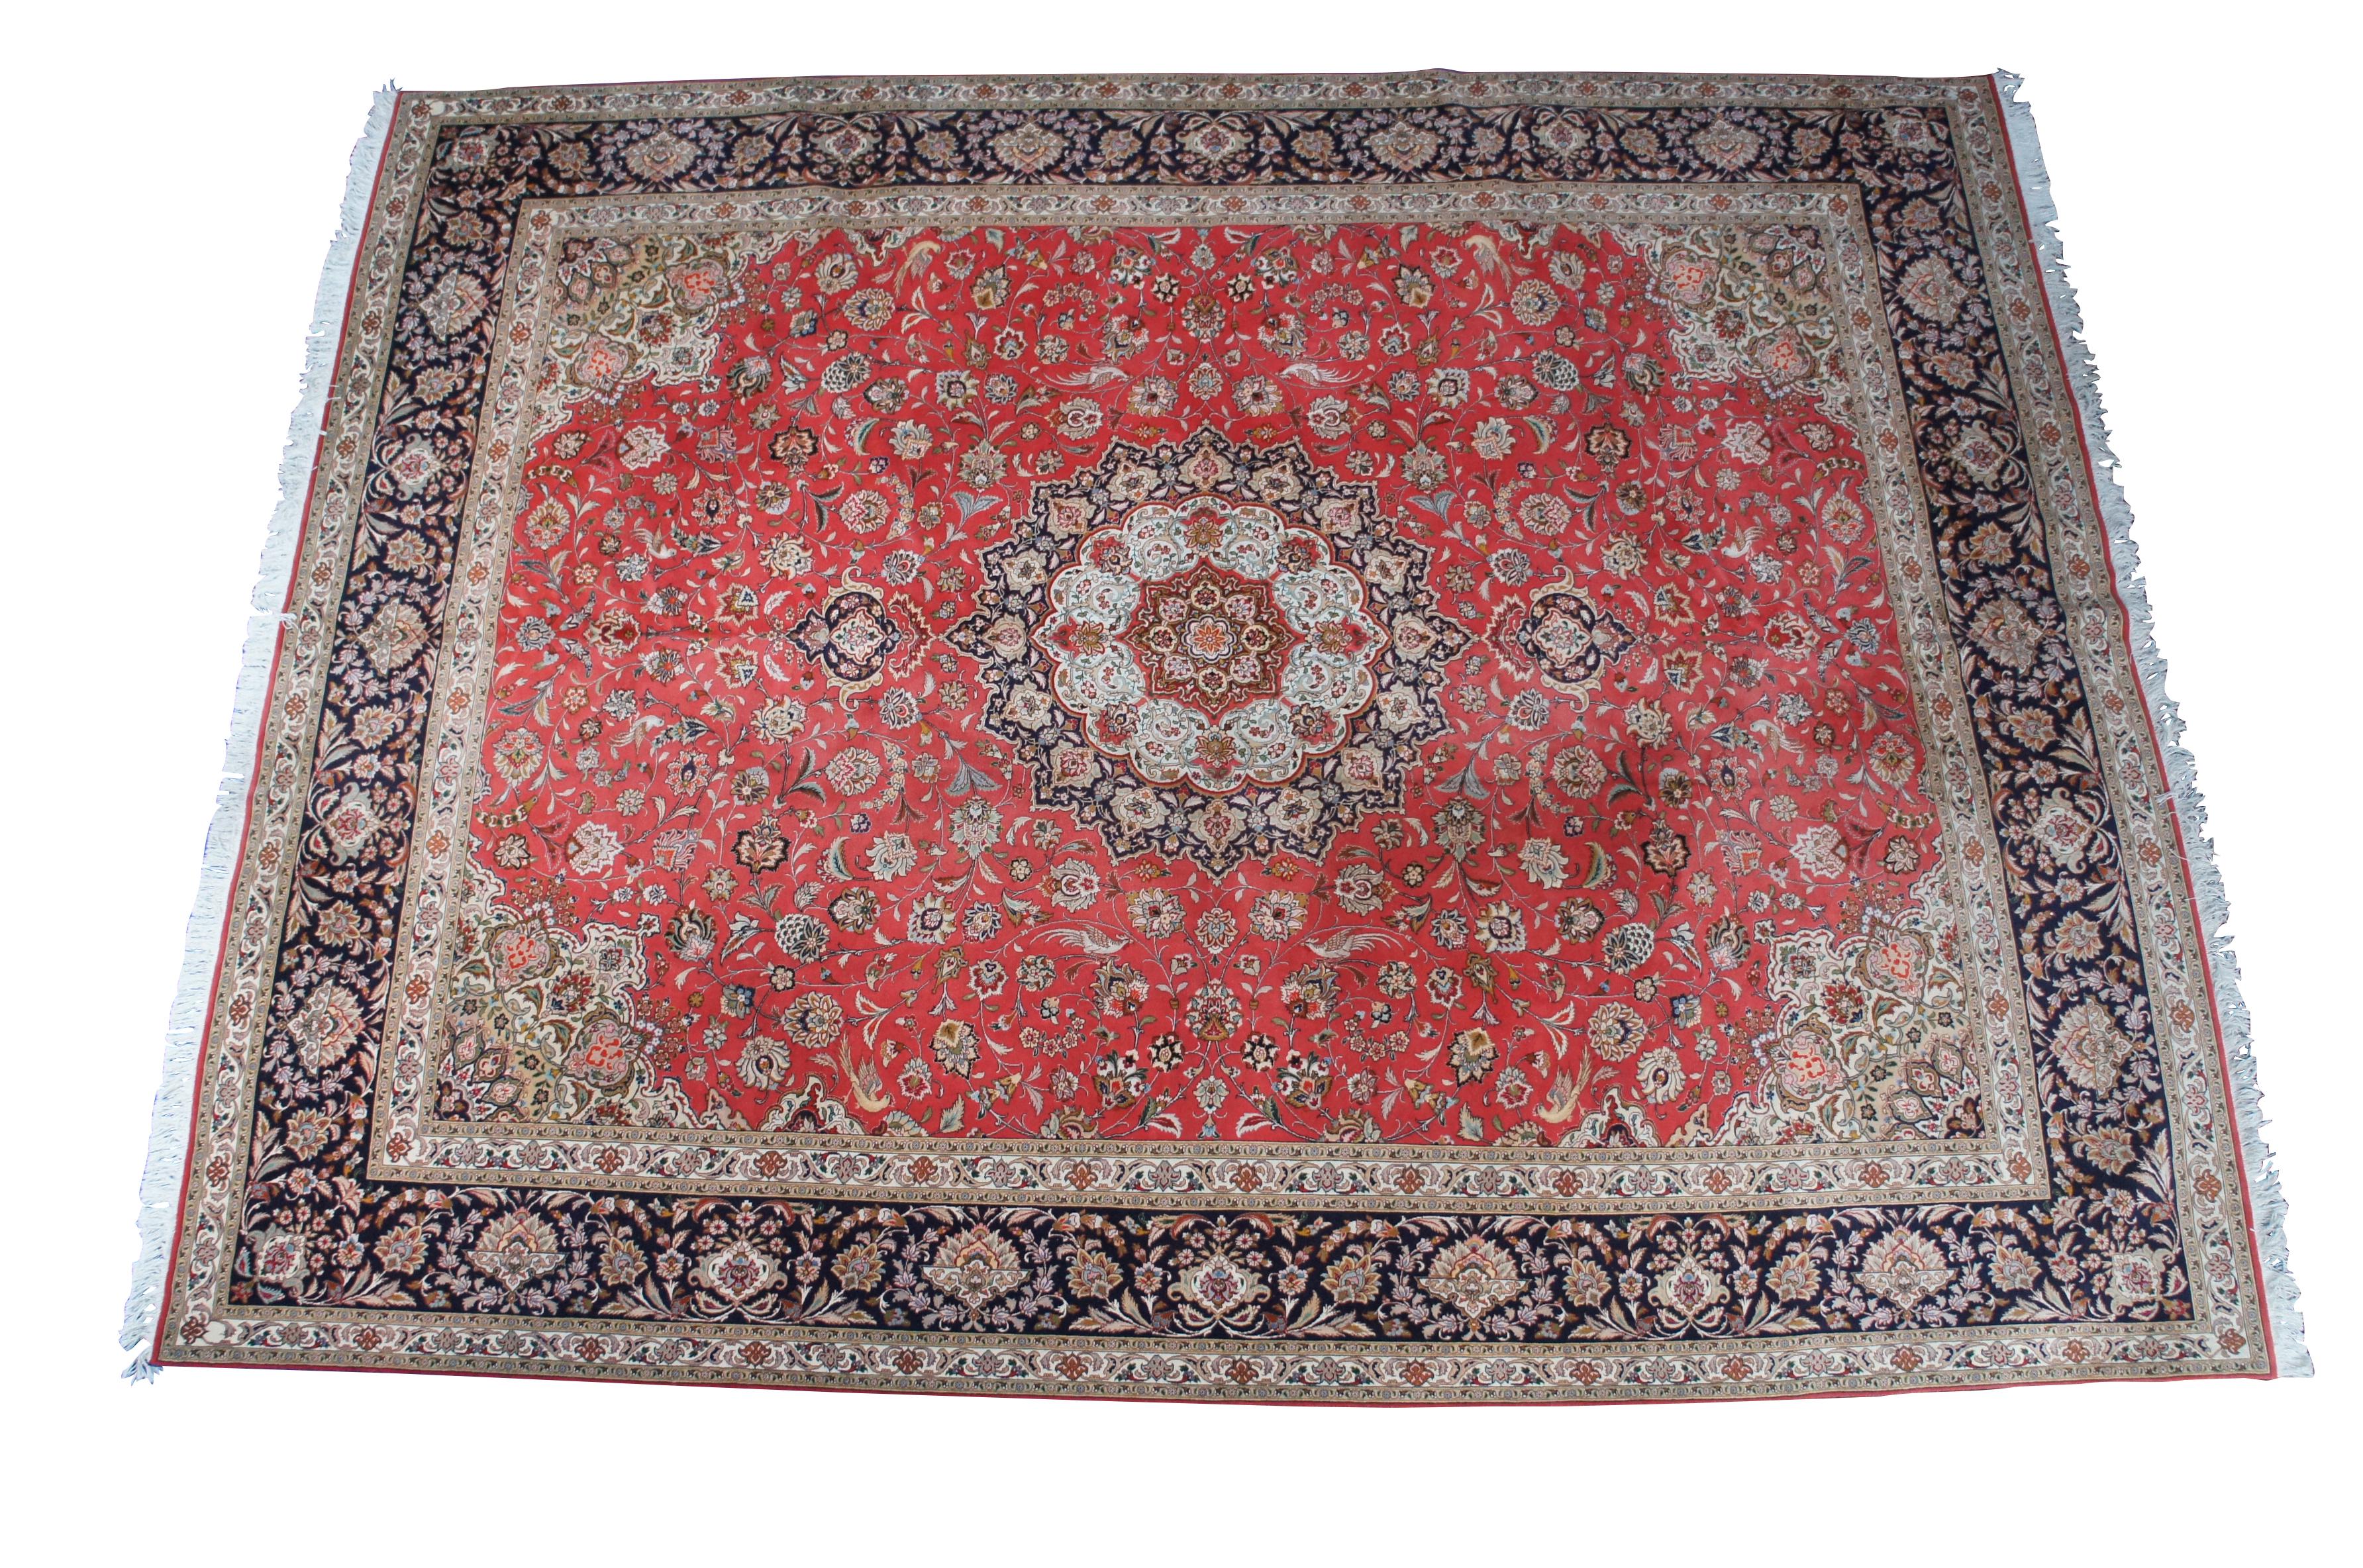 Very high quality vintage hand knotted Persian Tabriz.  Features silk and wool pile featuring a red field with central medallion and floral all over design with birds.  Reds, Blues, Tans, Creme, Pink, Greens, Yellows, Orange, Browns

Appraised in